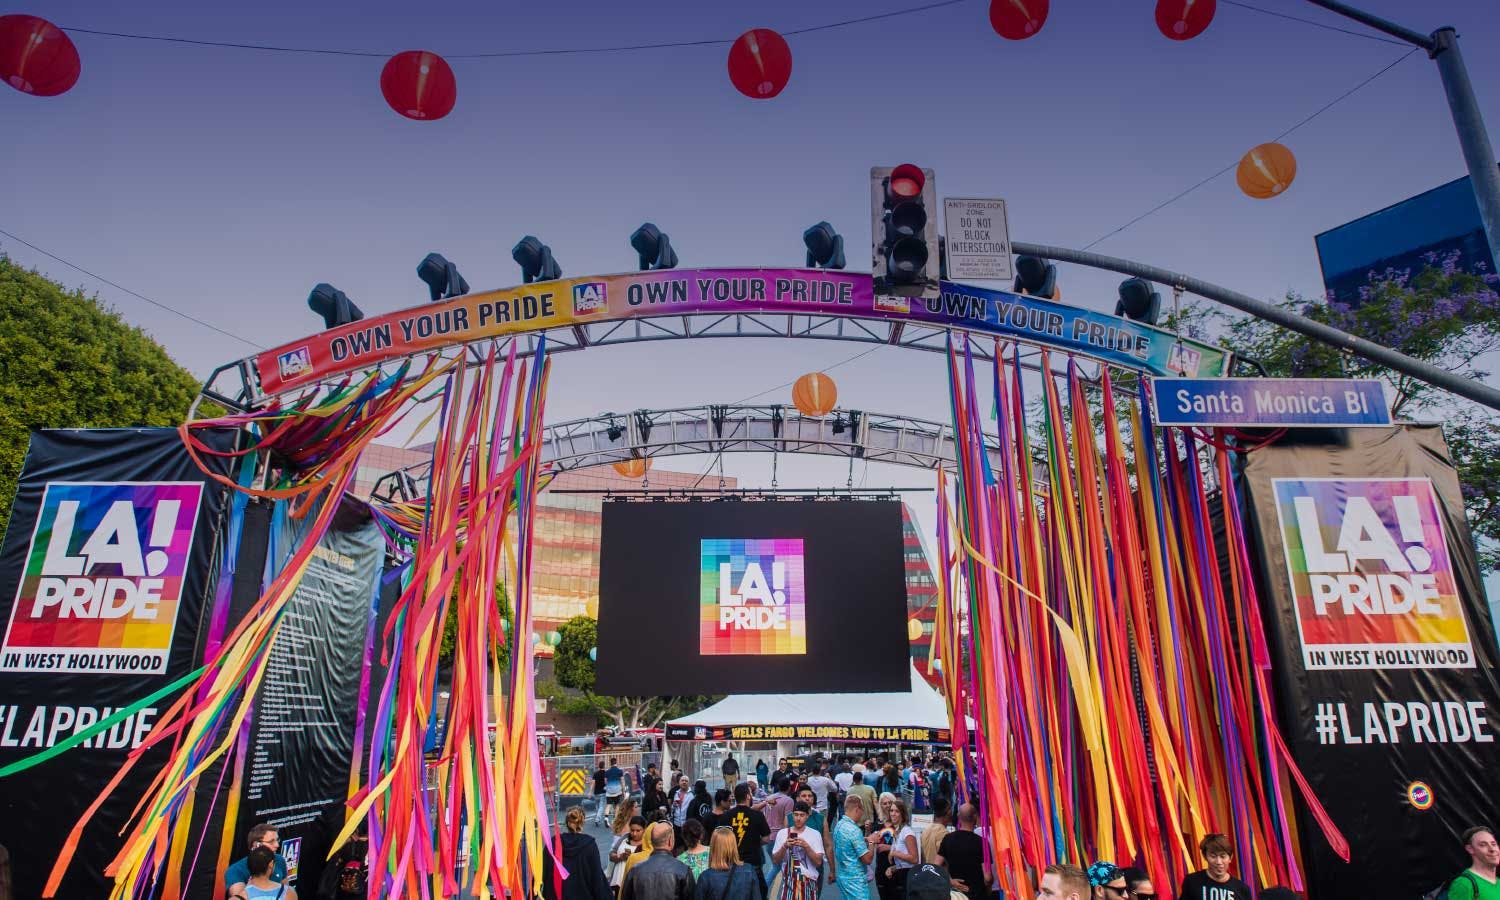 An archway of colorful streamers and Chinese lanterns at LA's Pride Parade with people underneath the arch